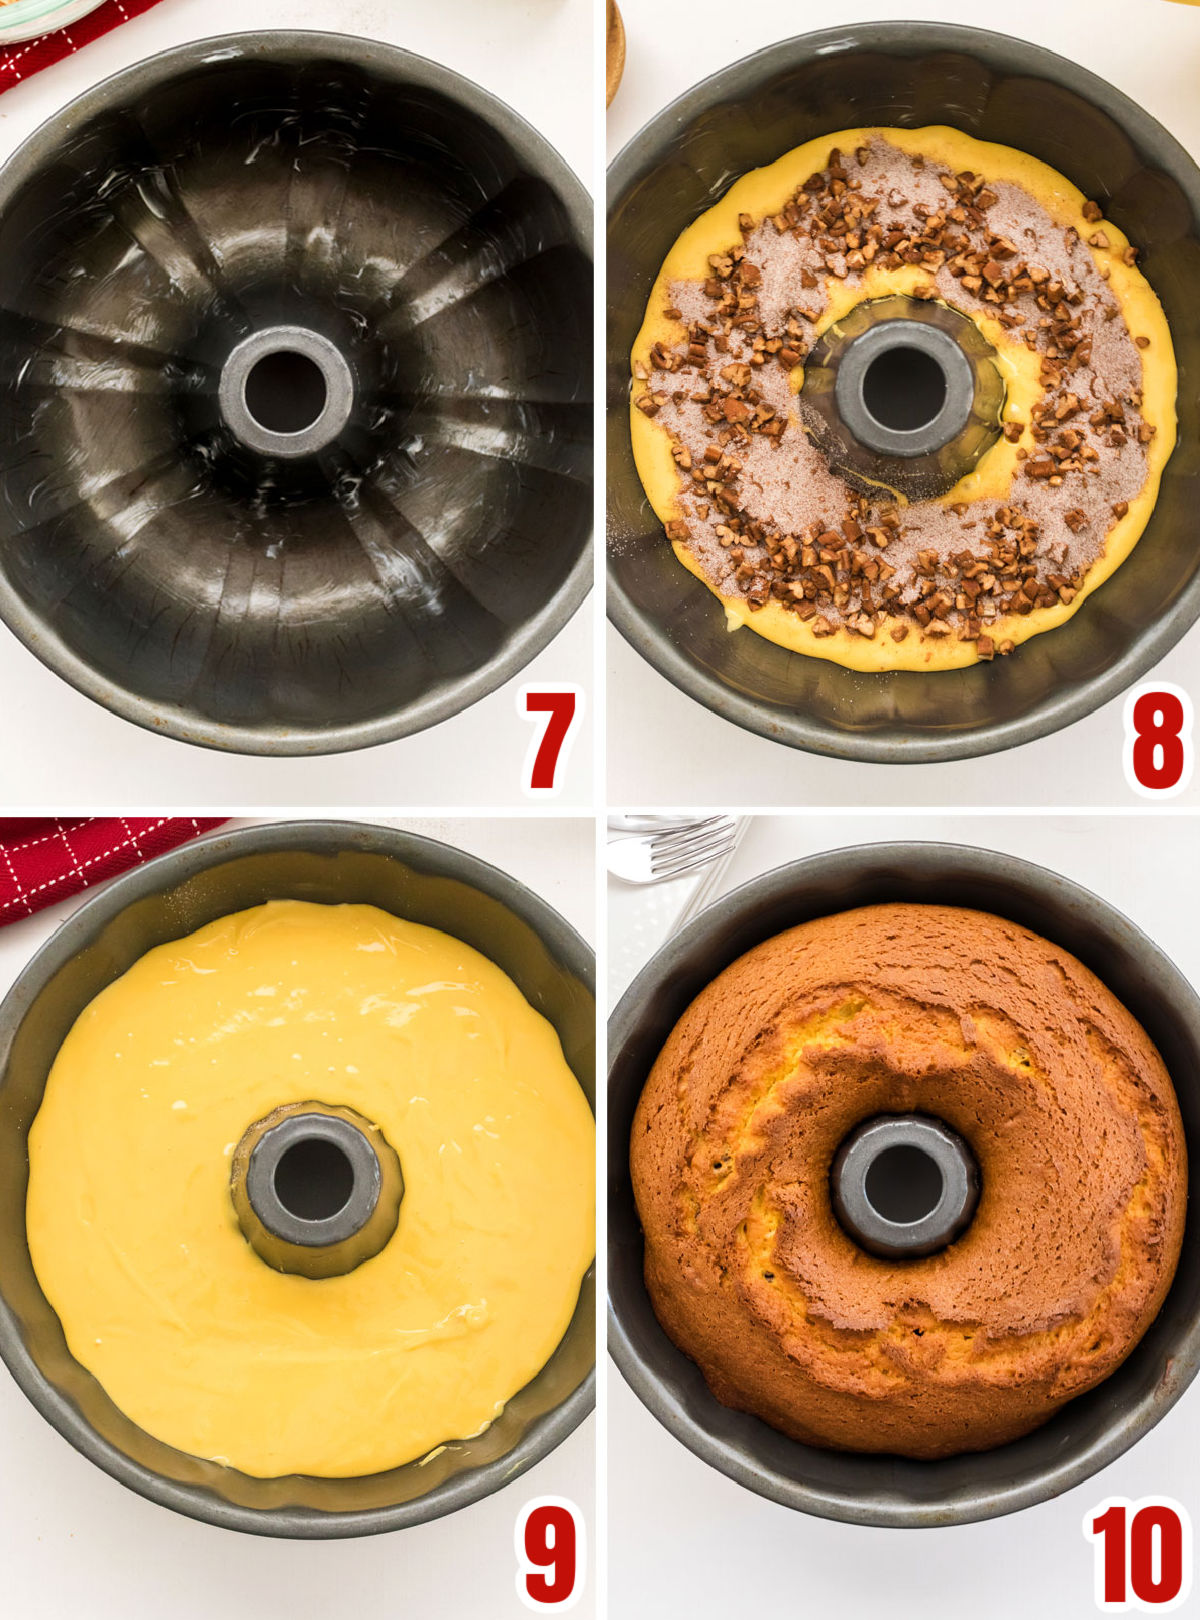 Collage image on how to assemble the cake batter in the bundt pan for baking.